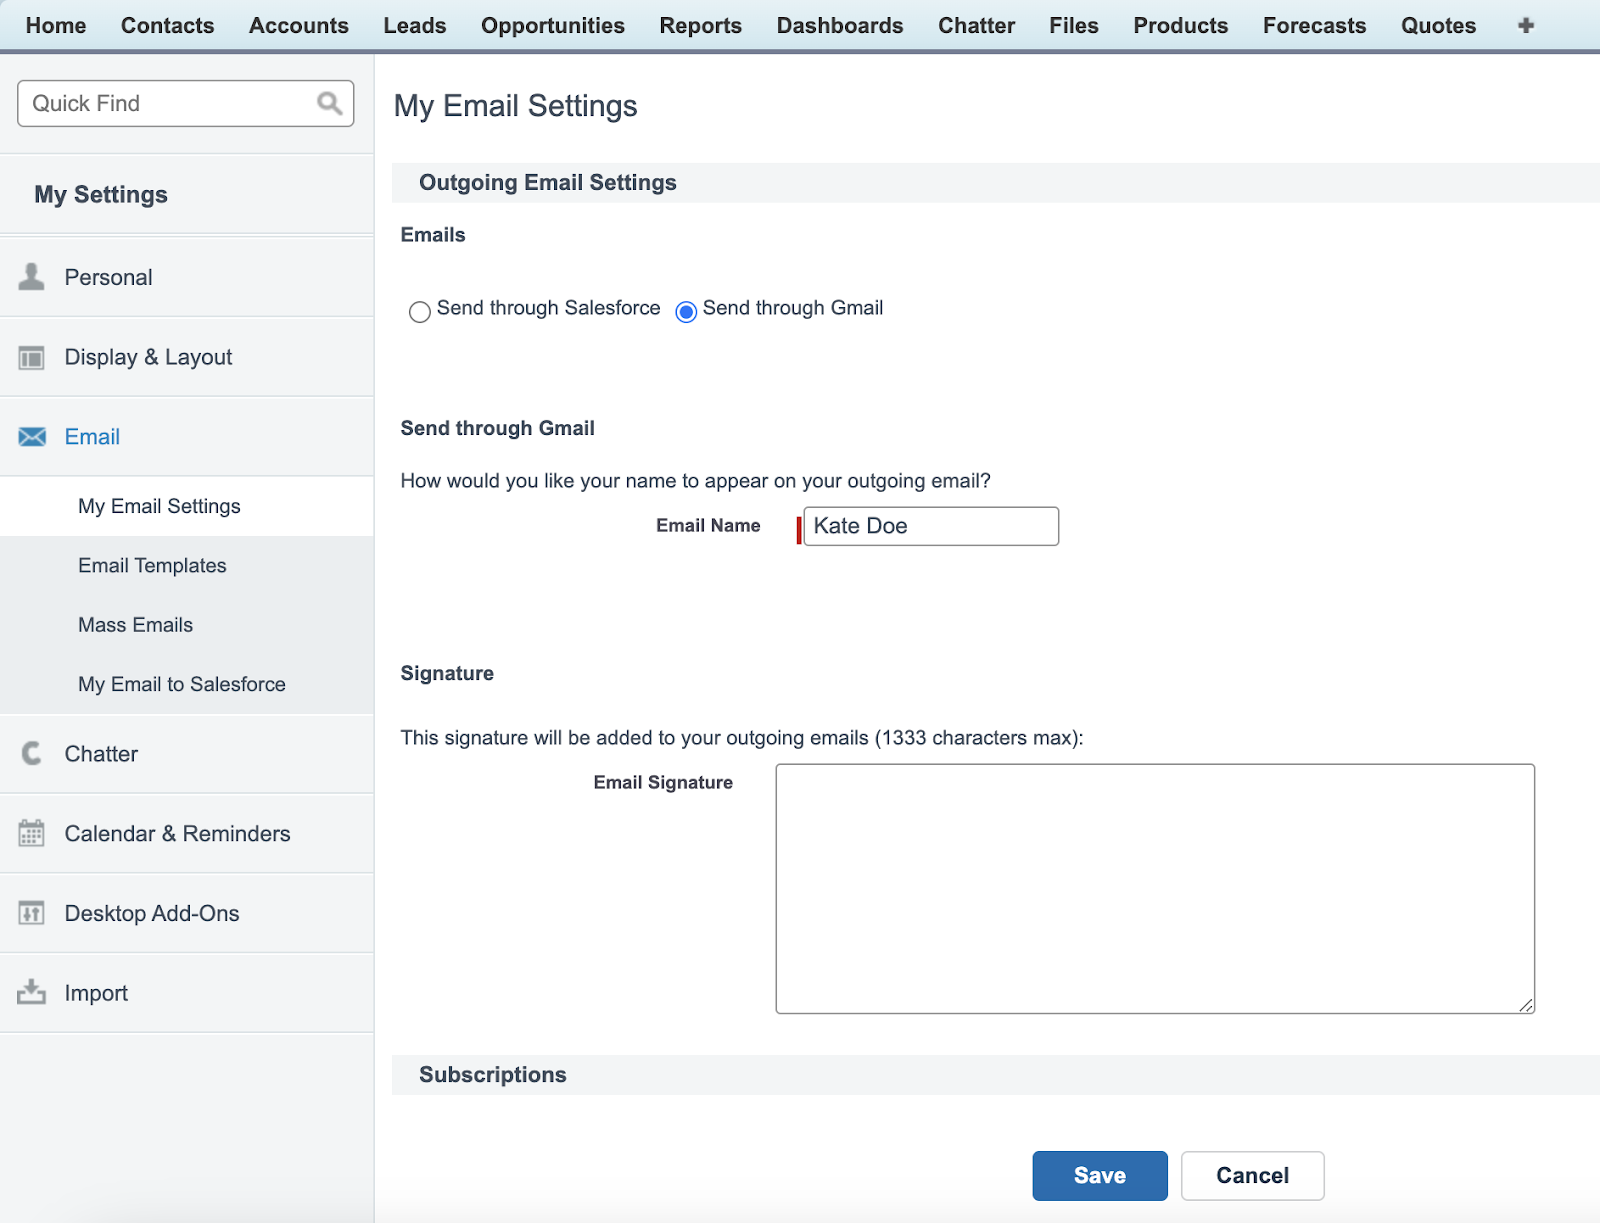 Configuring email settings in Salesforce Classic